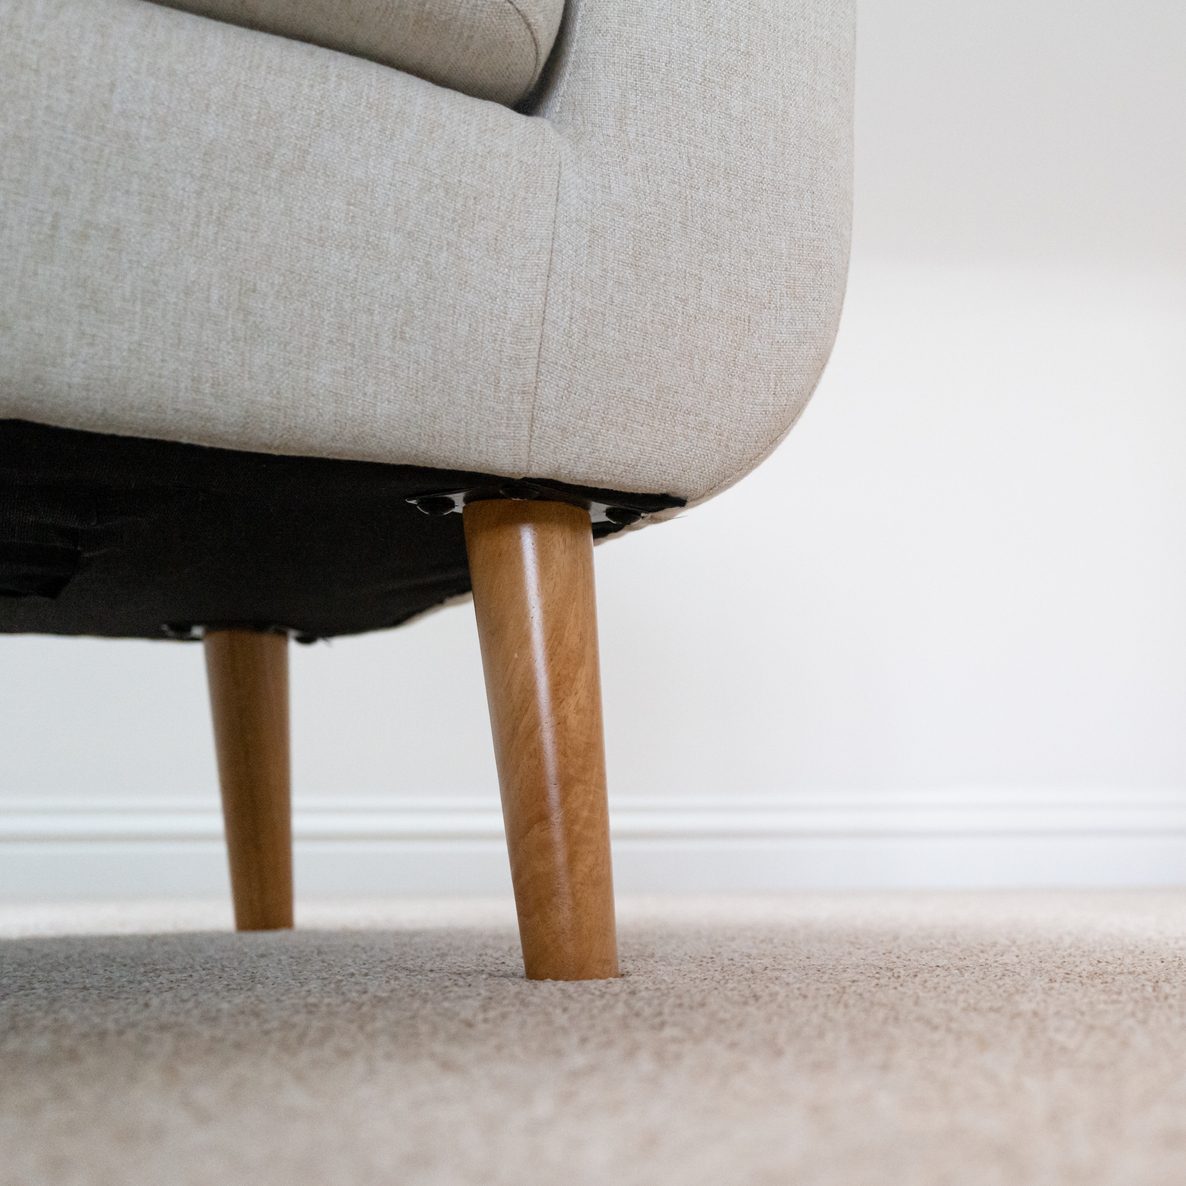 Carpet level view of a modern bedroom chair.